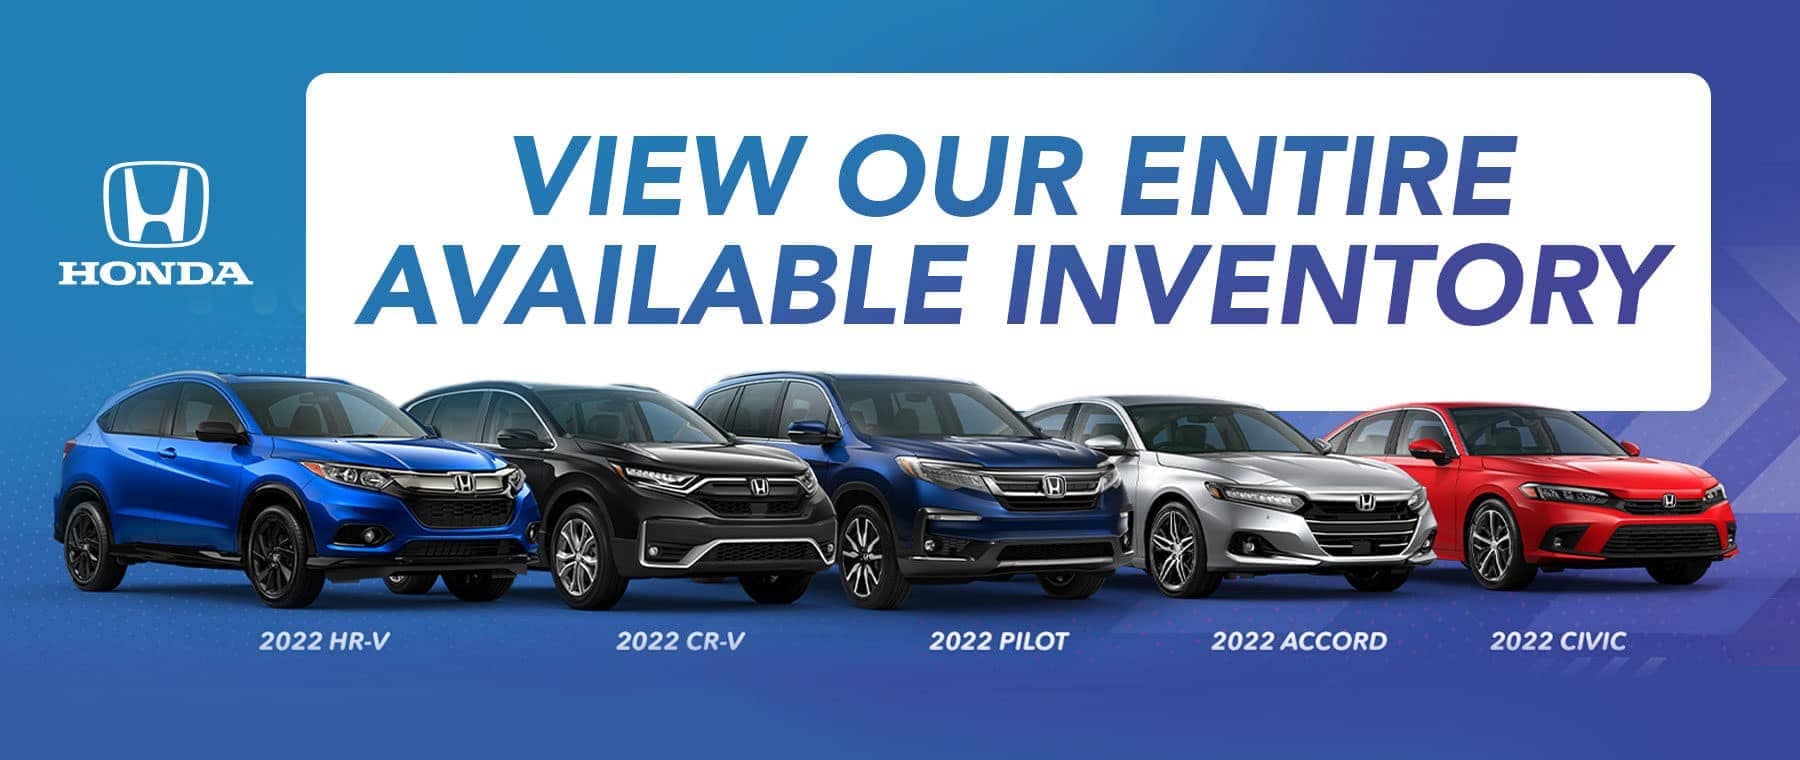 View Our Entire Available Inventory